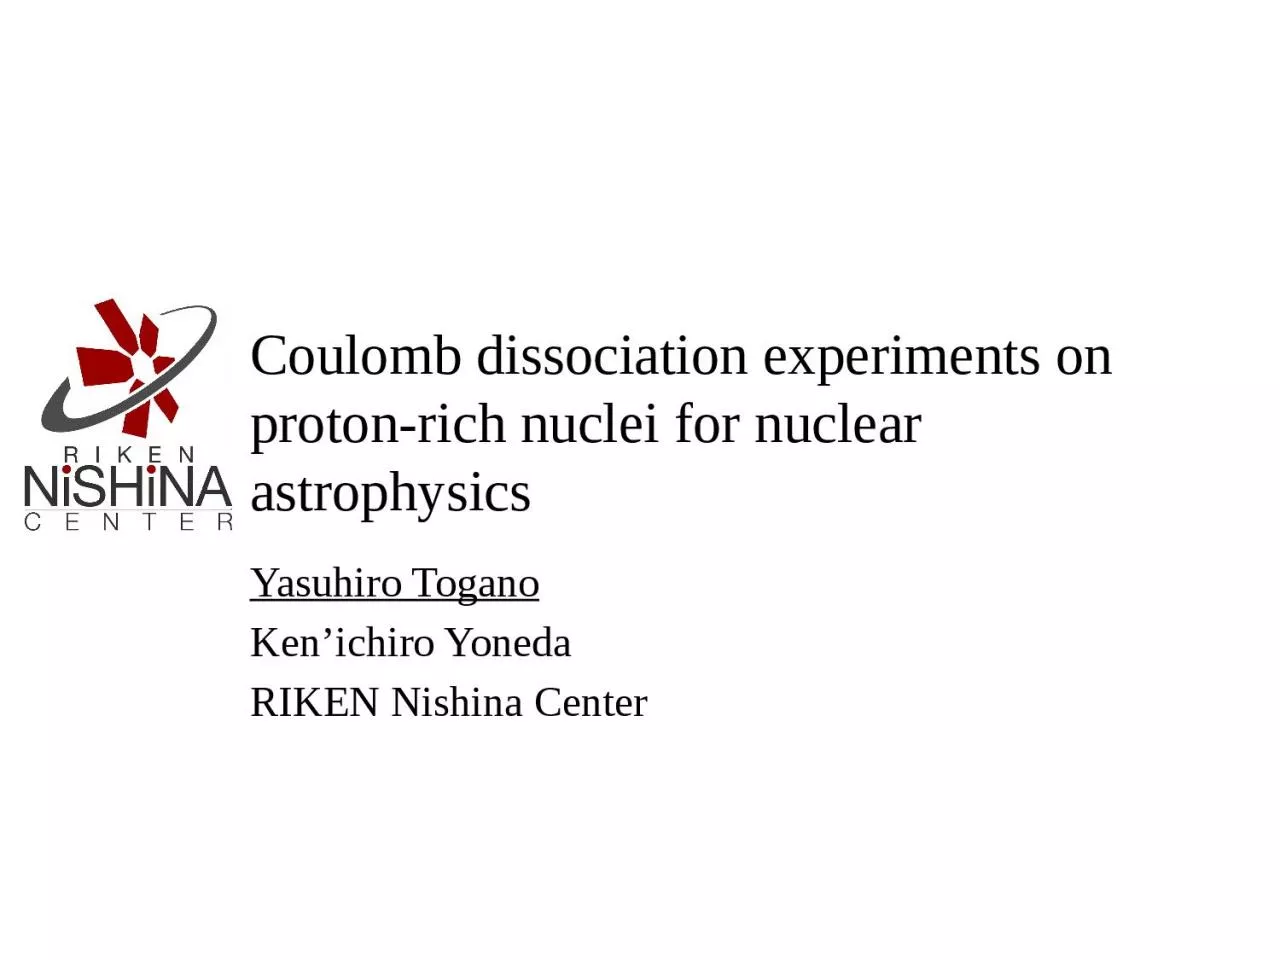 Coulomb dissociation experiments on proton-rich nuclei for nuclear astrophysics